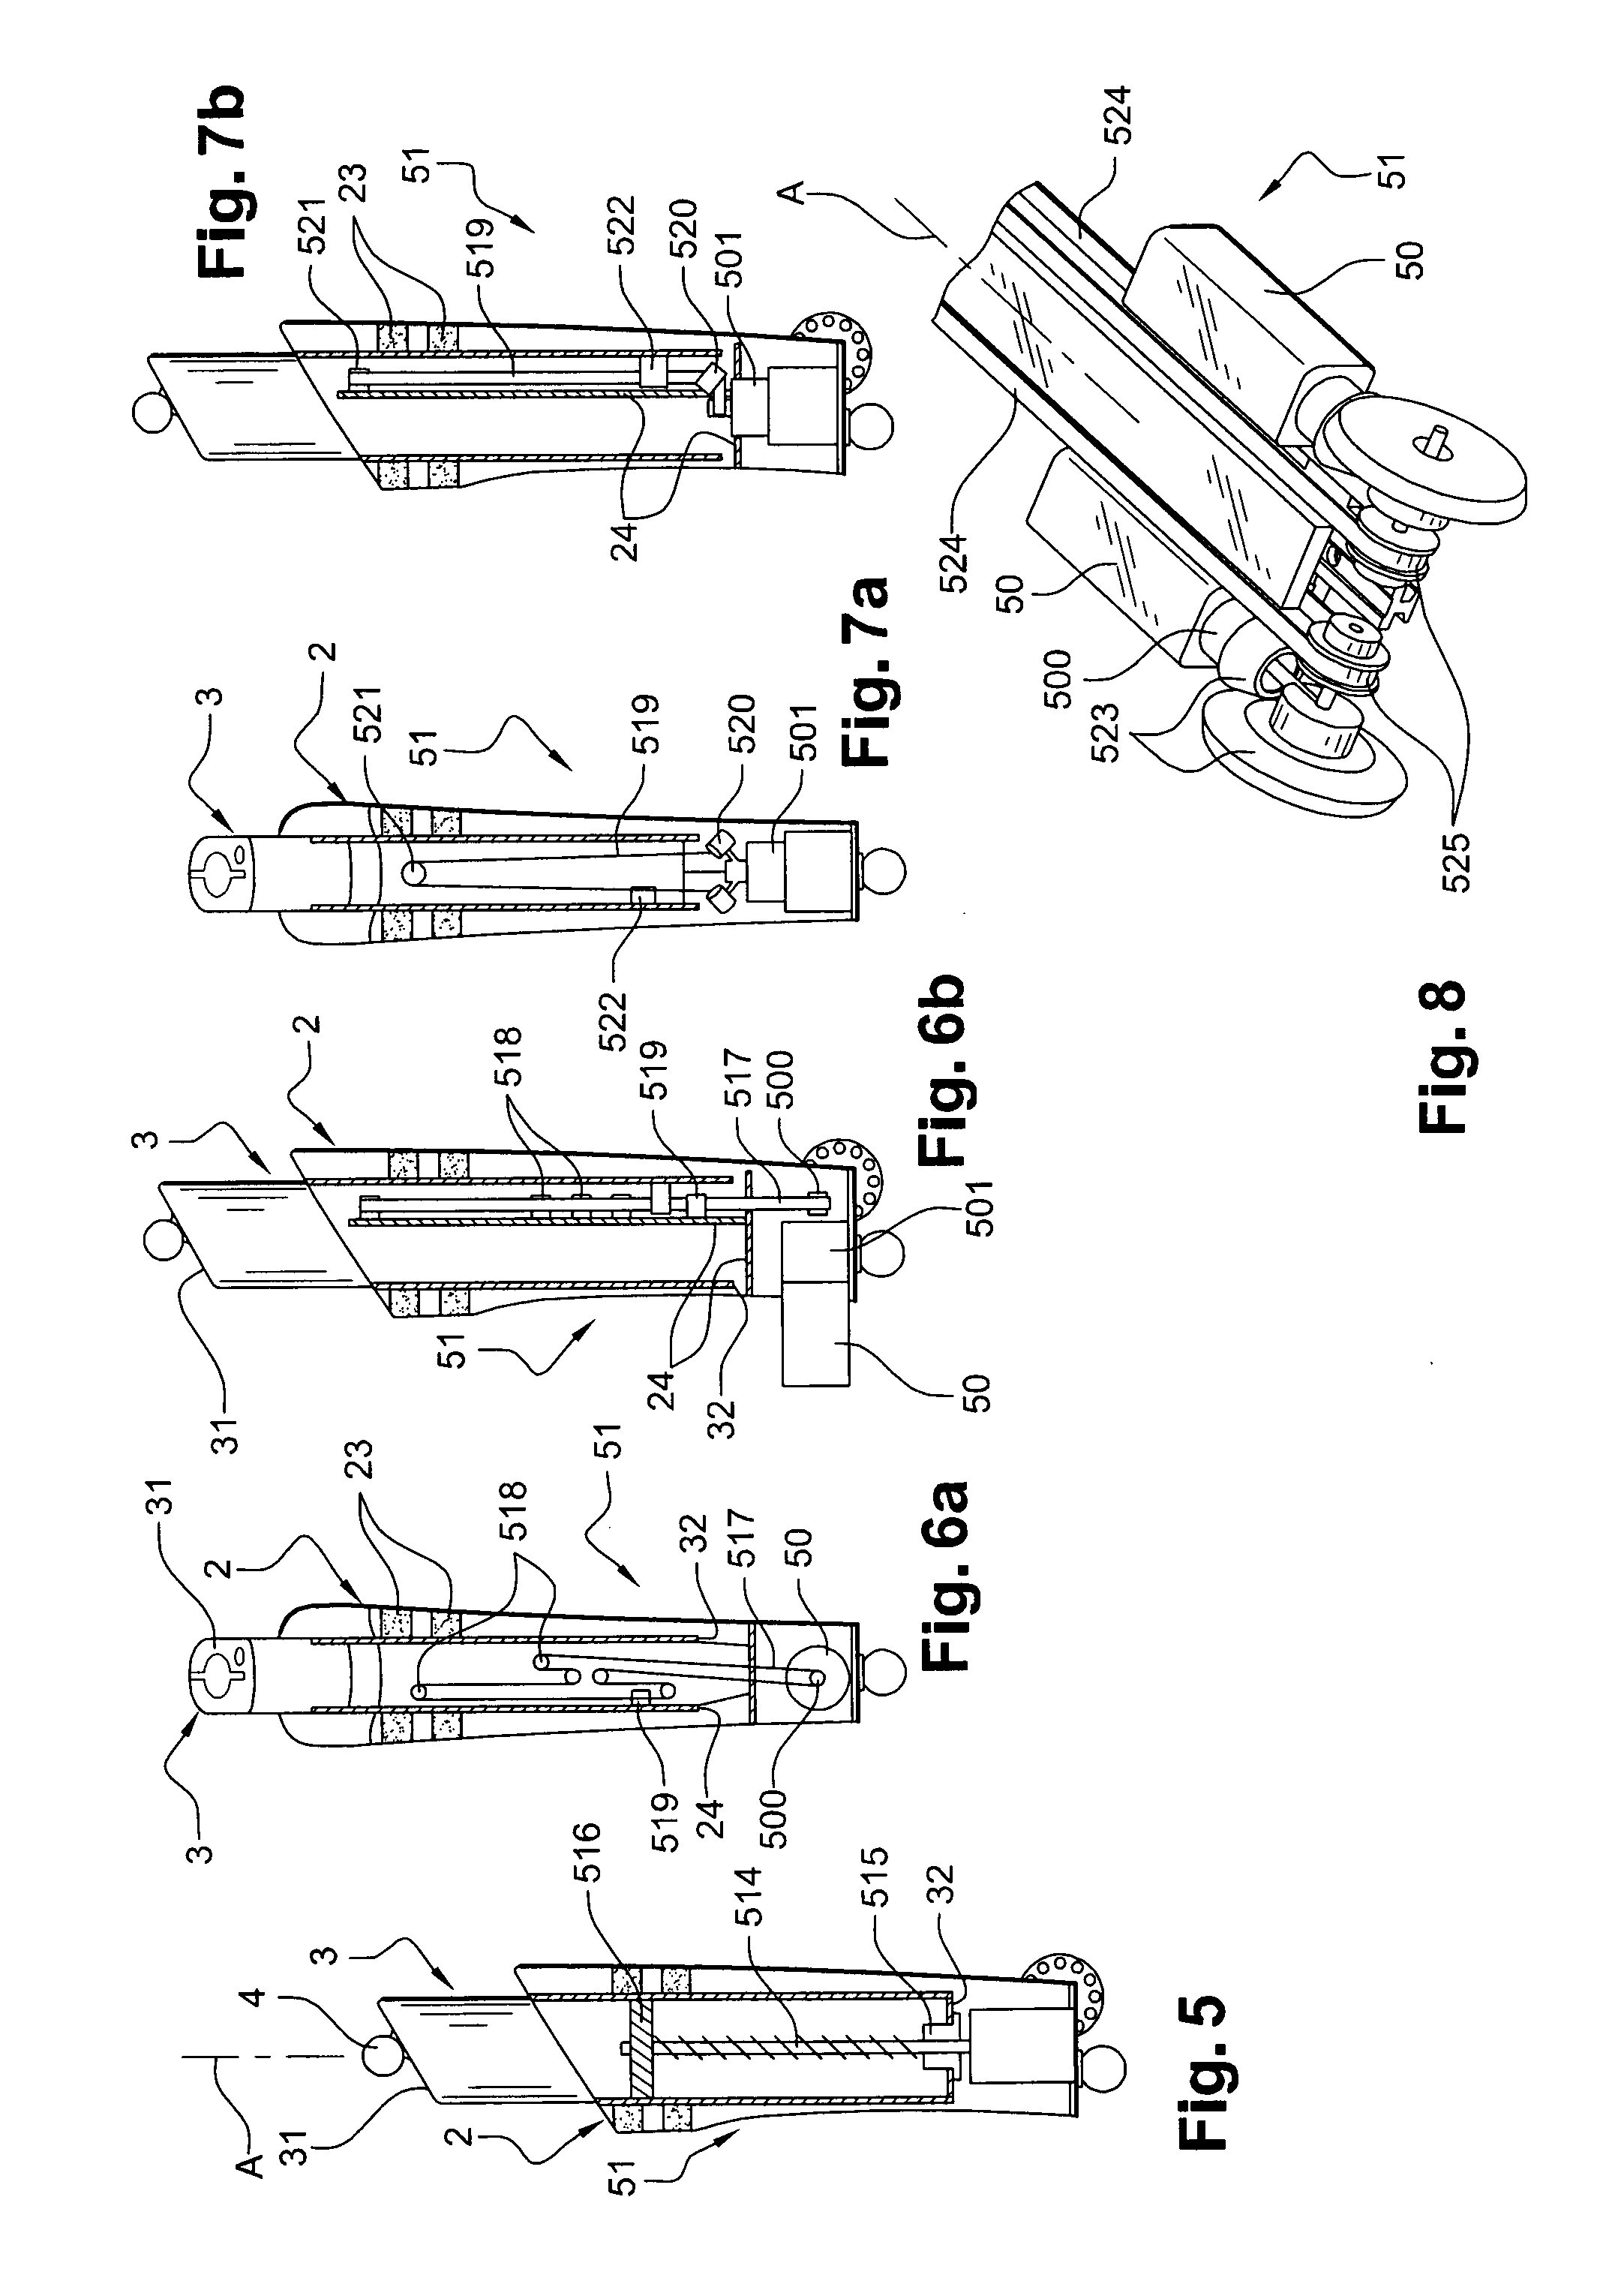 Muscle and/or joint exercise apparatus